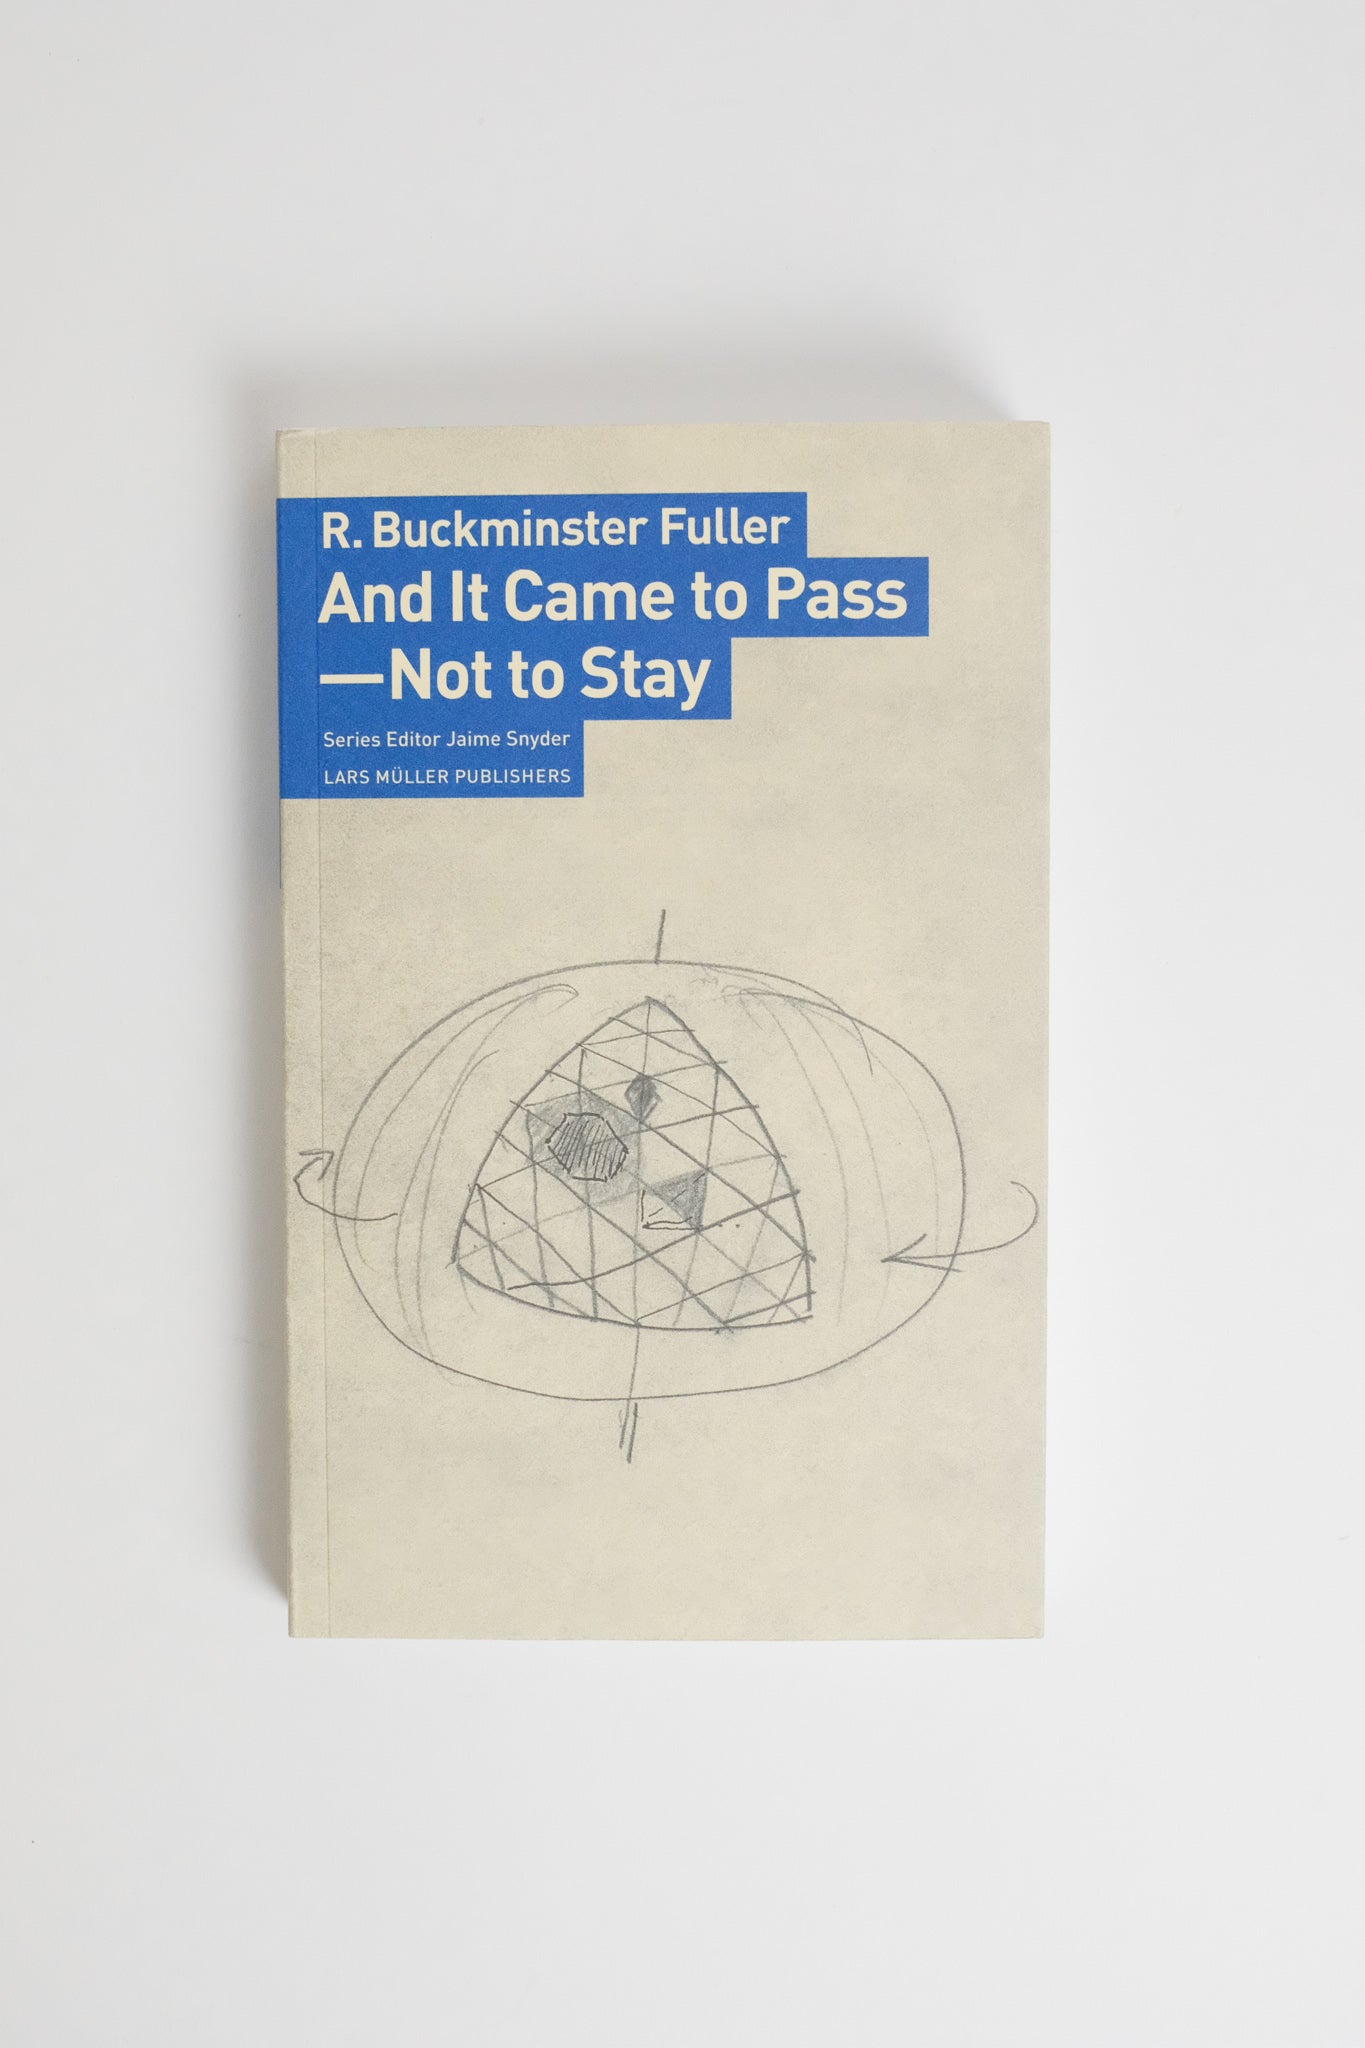 And It Came To Pass - Not To Stay: R. Buckminster Fuller